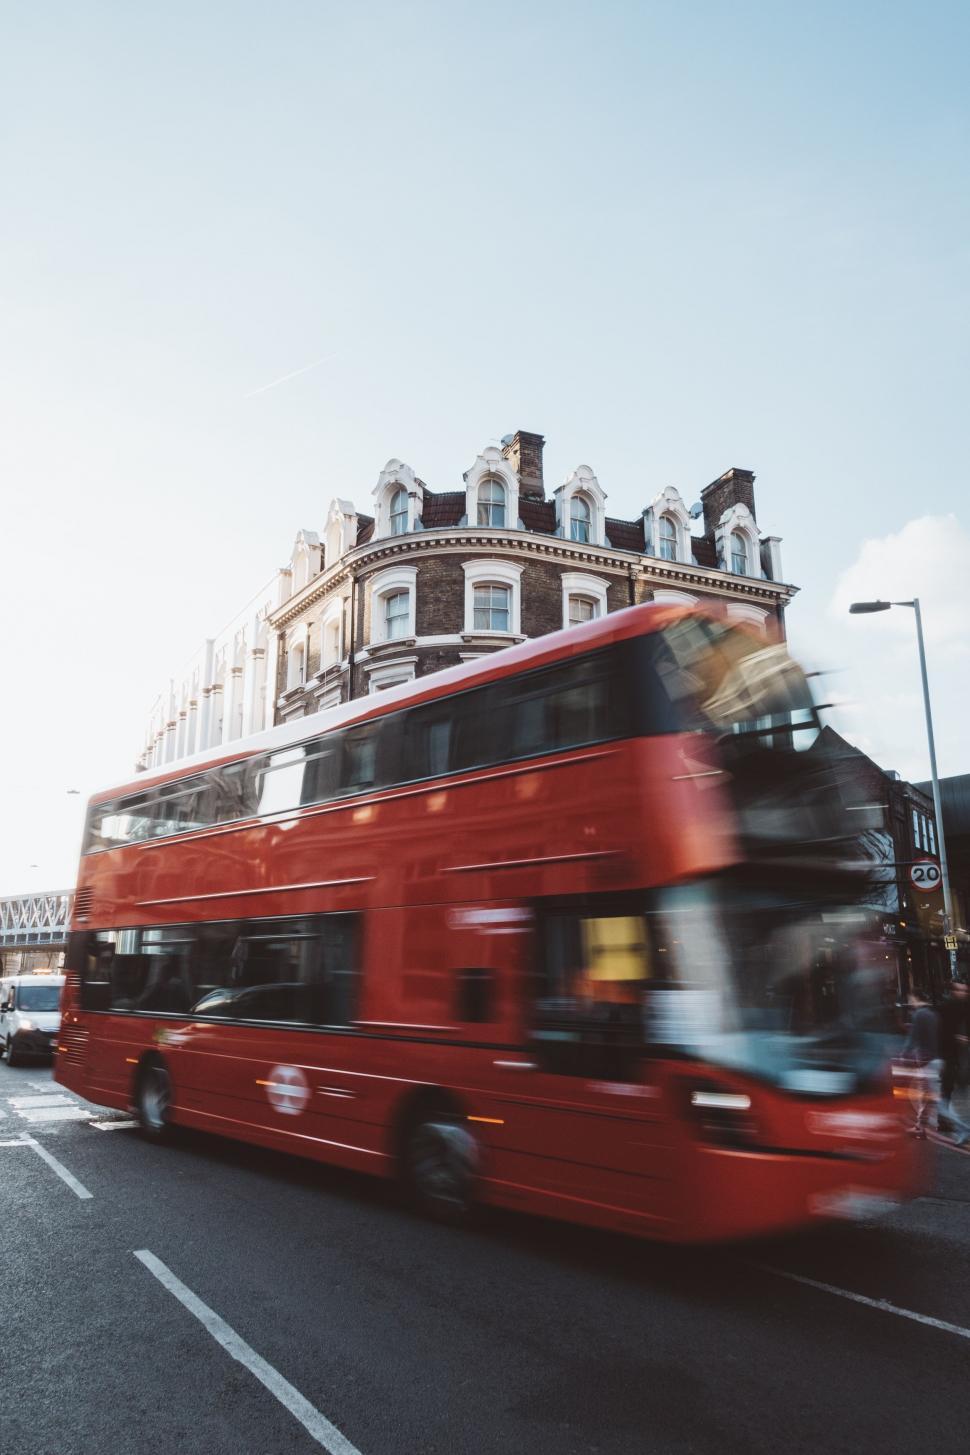 Free Image of Red Double Decker Bus Driving Down a Street 